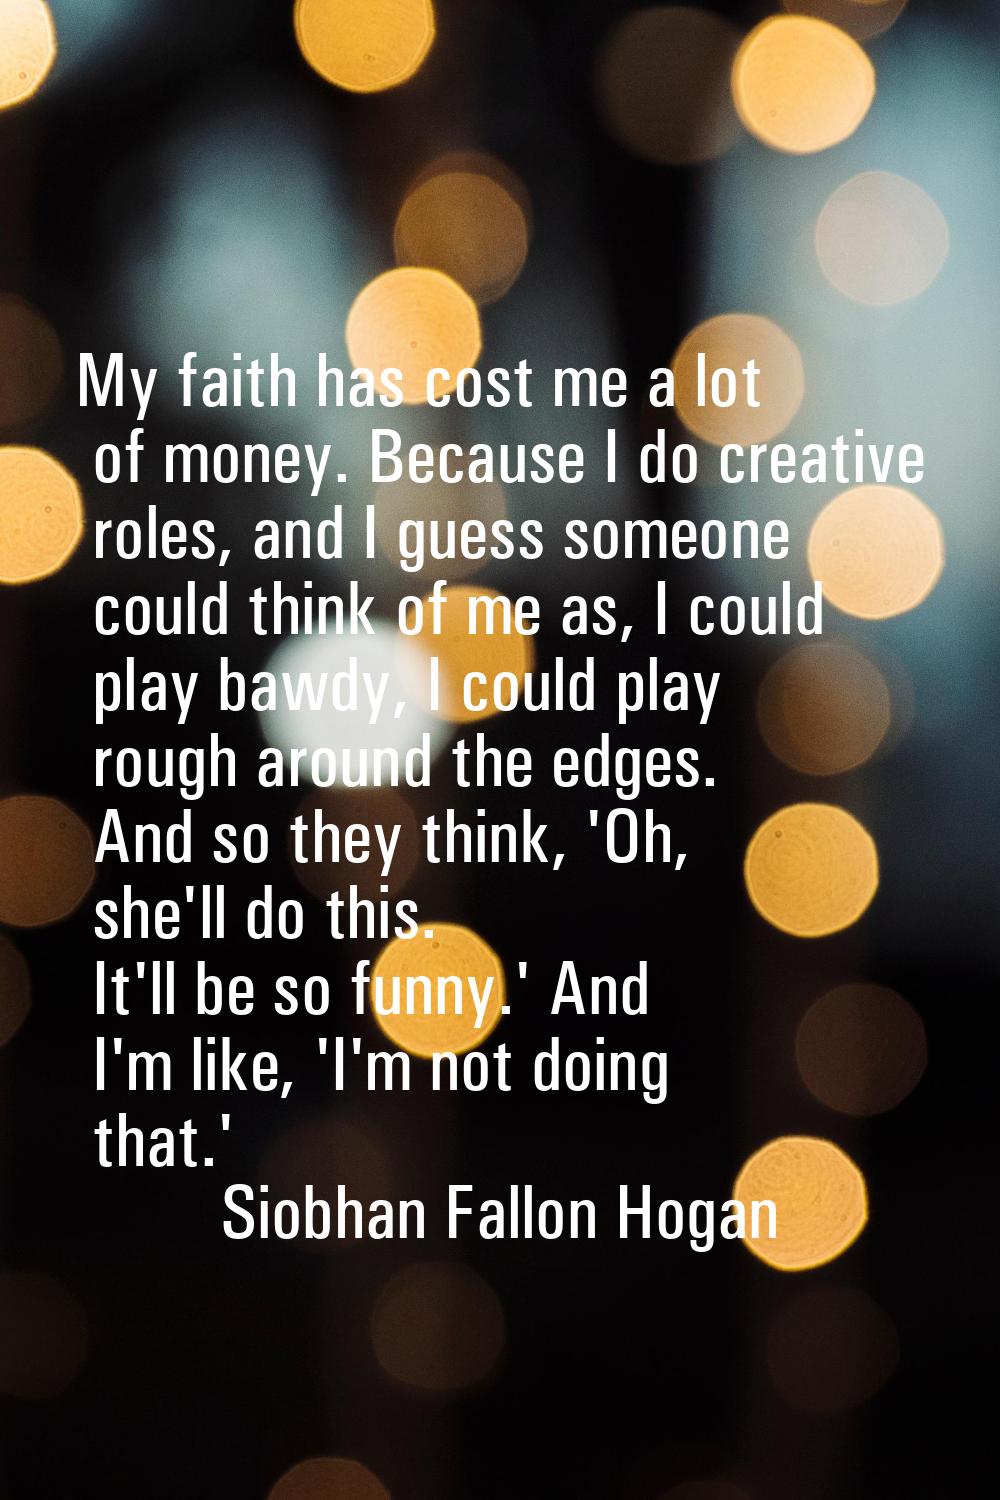 My faith has cost me a lot of money. Because I do creative roles, and I guess someone could think o